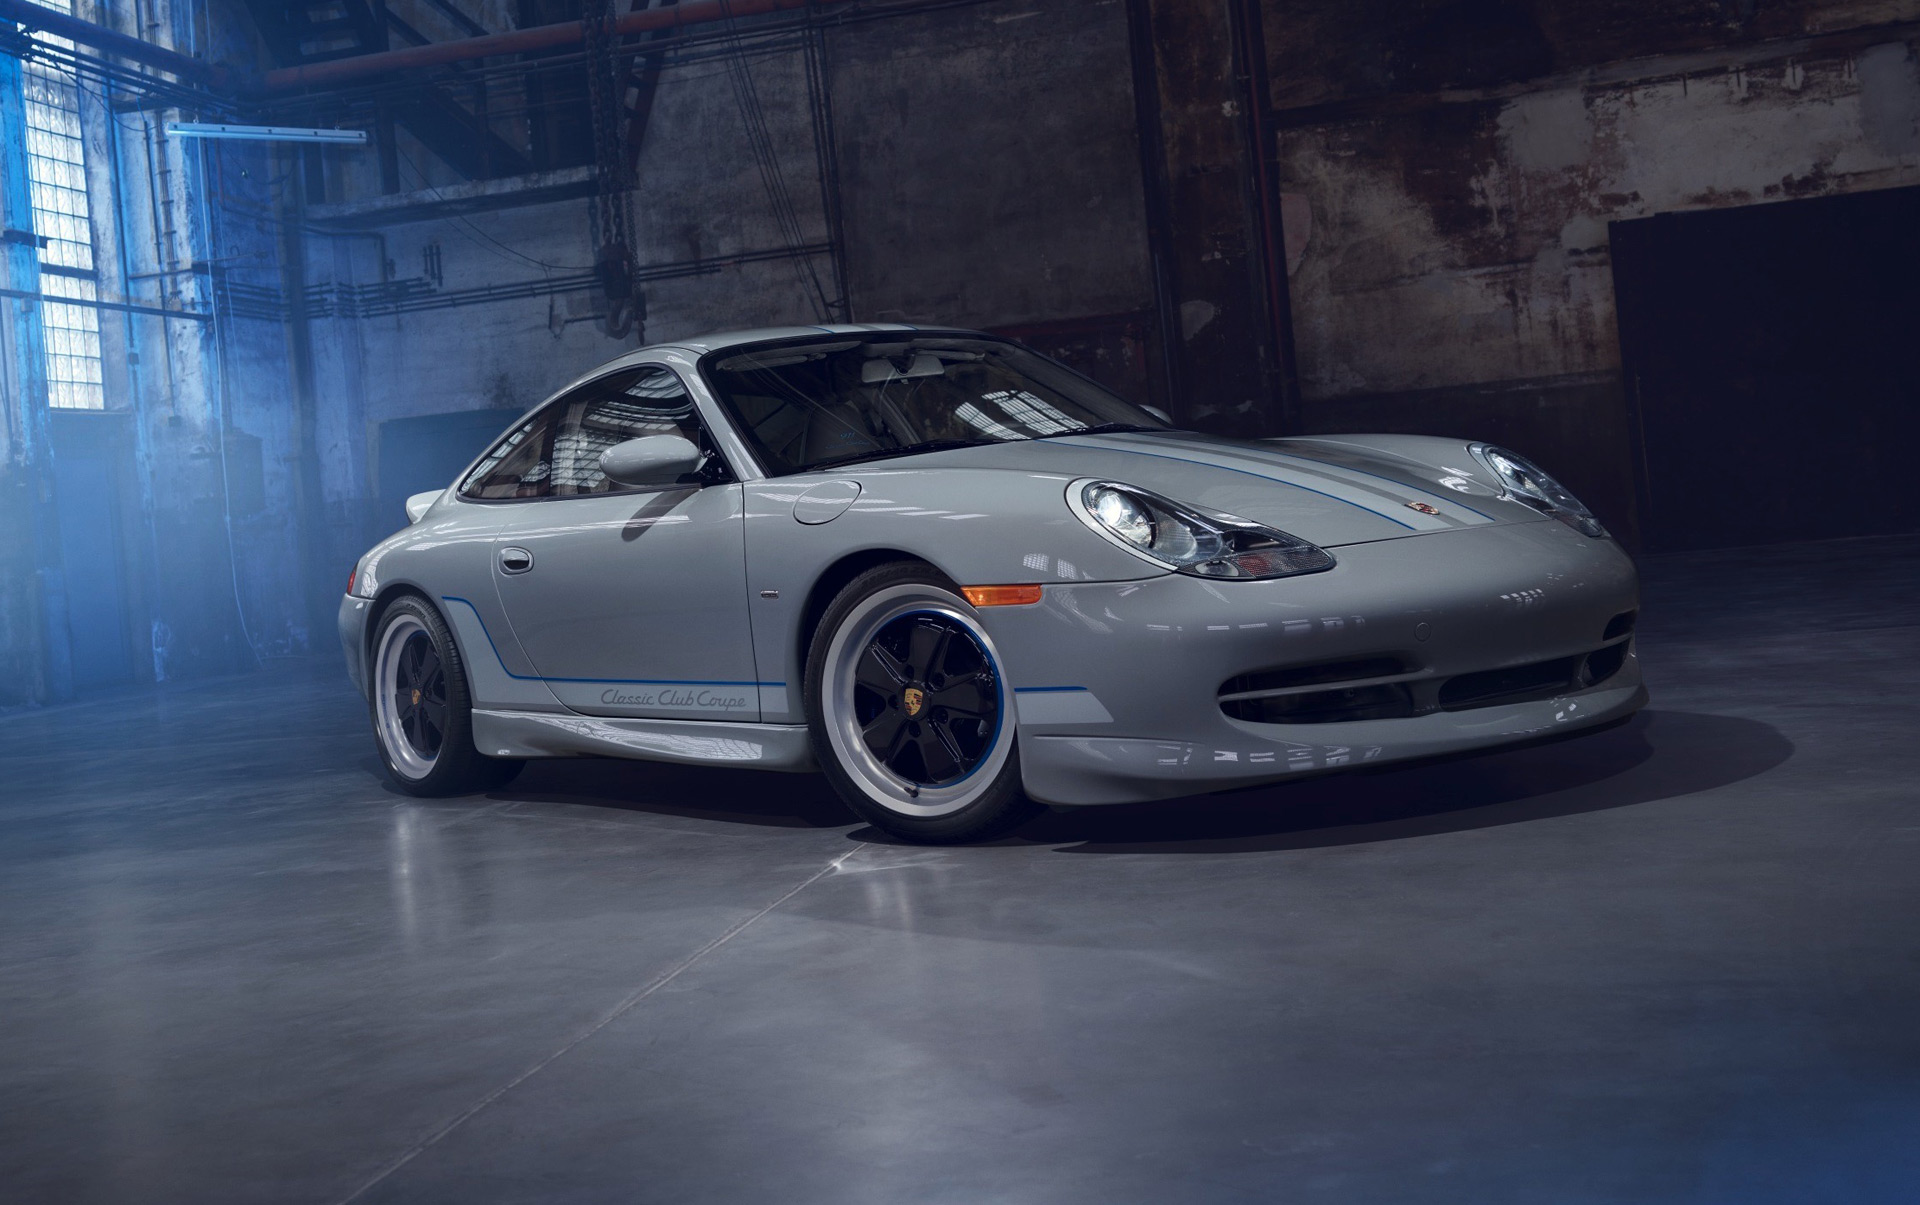 One-off 996 Porsche 911 Club Coupe heads to auction